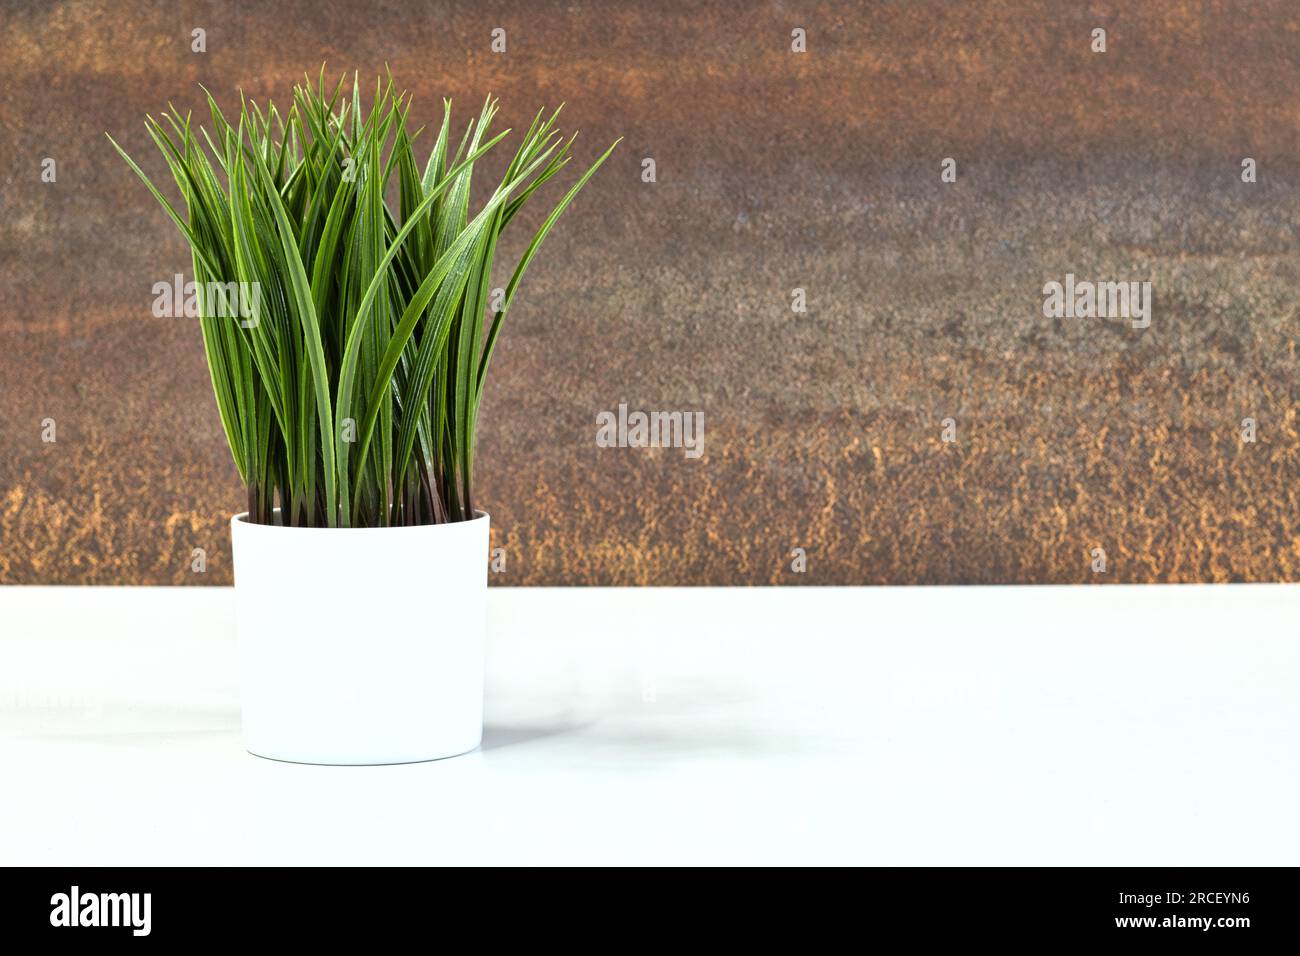 Contemporary interior design, artificial decorative potted plant on a white partial table and brown defocused feature wall. Stock Photo